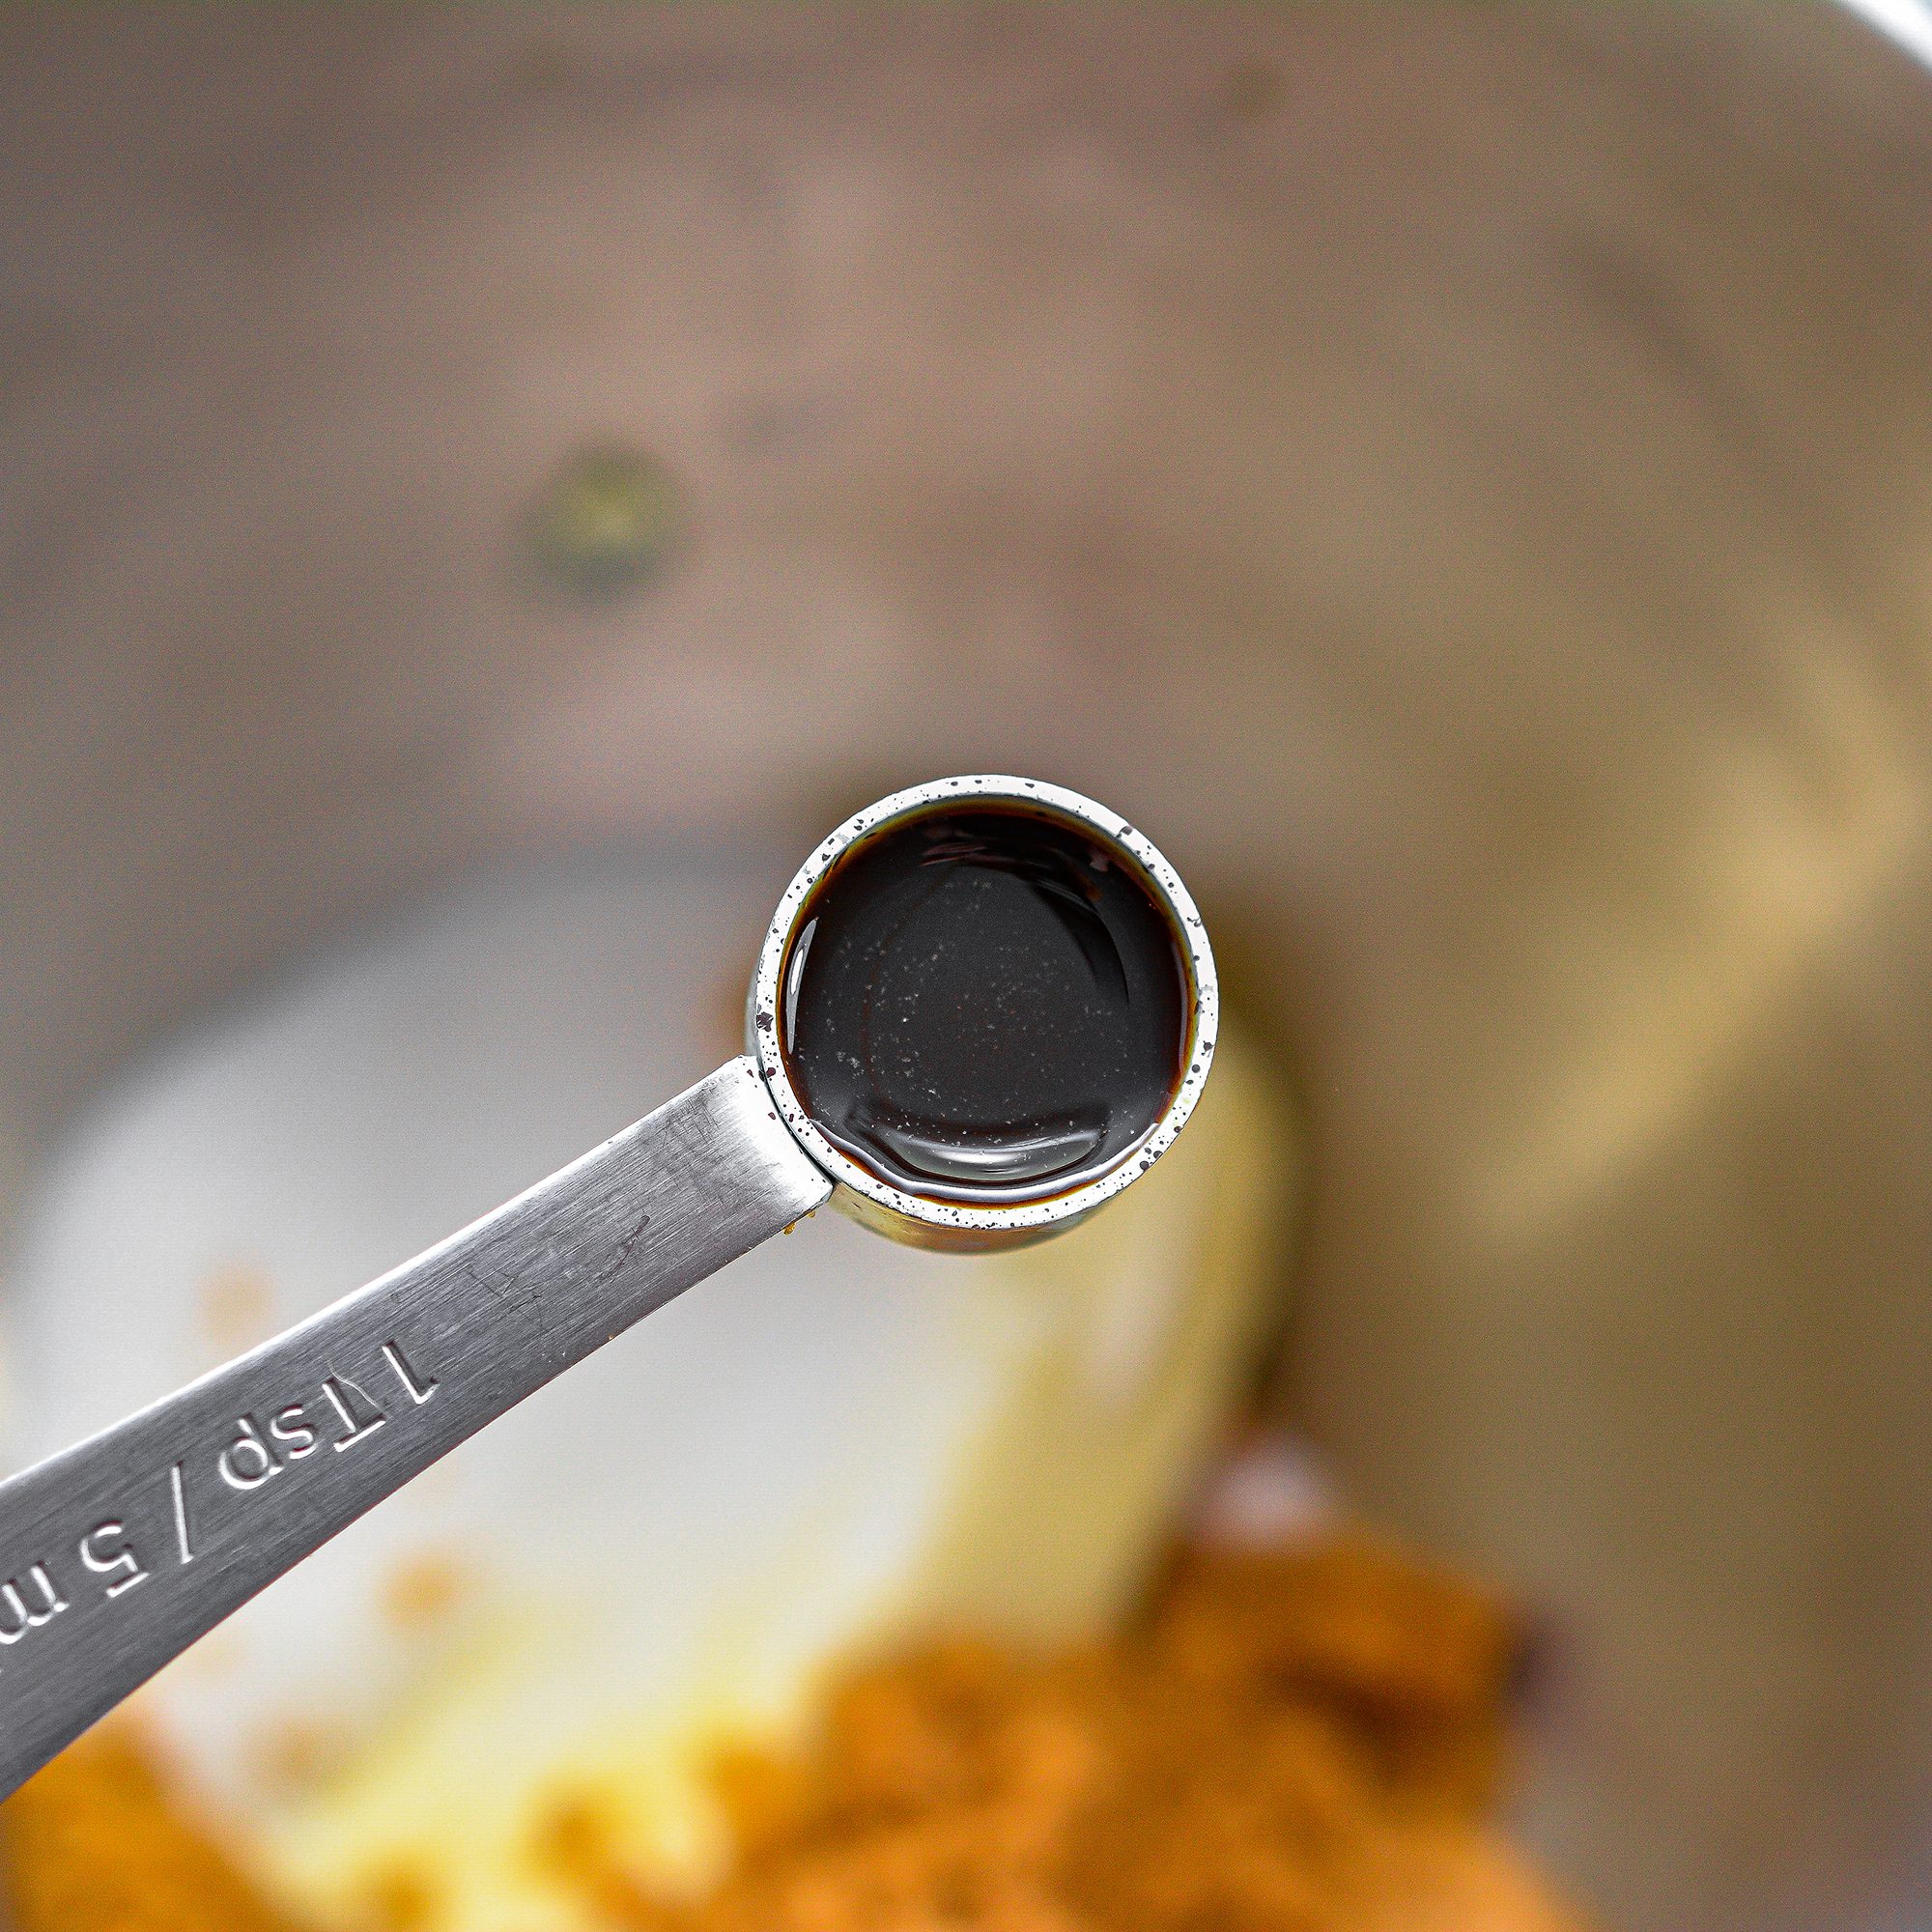 In a mixing bowl, blend together the sugars, butter and vanilla until creamy.